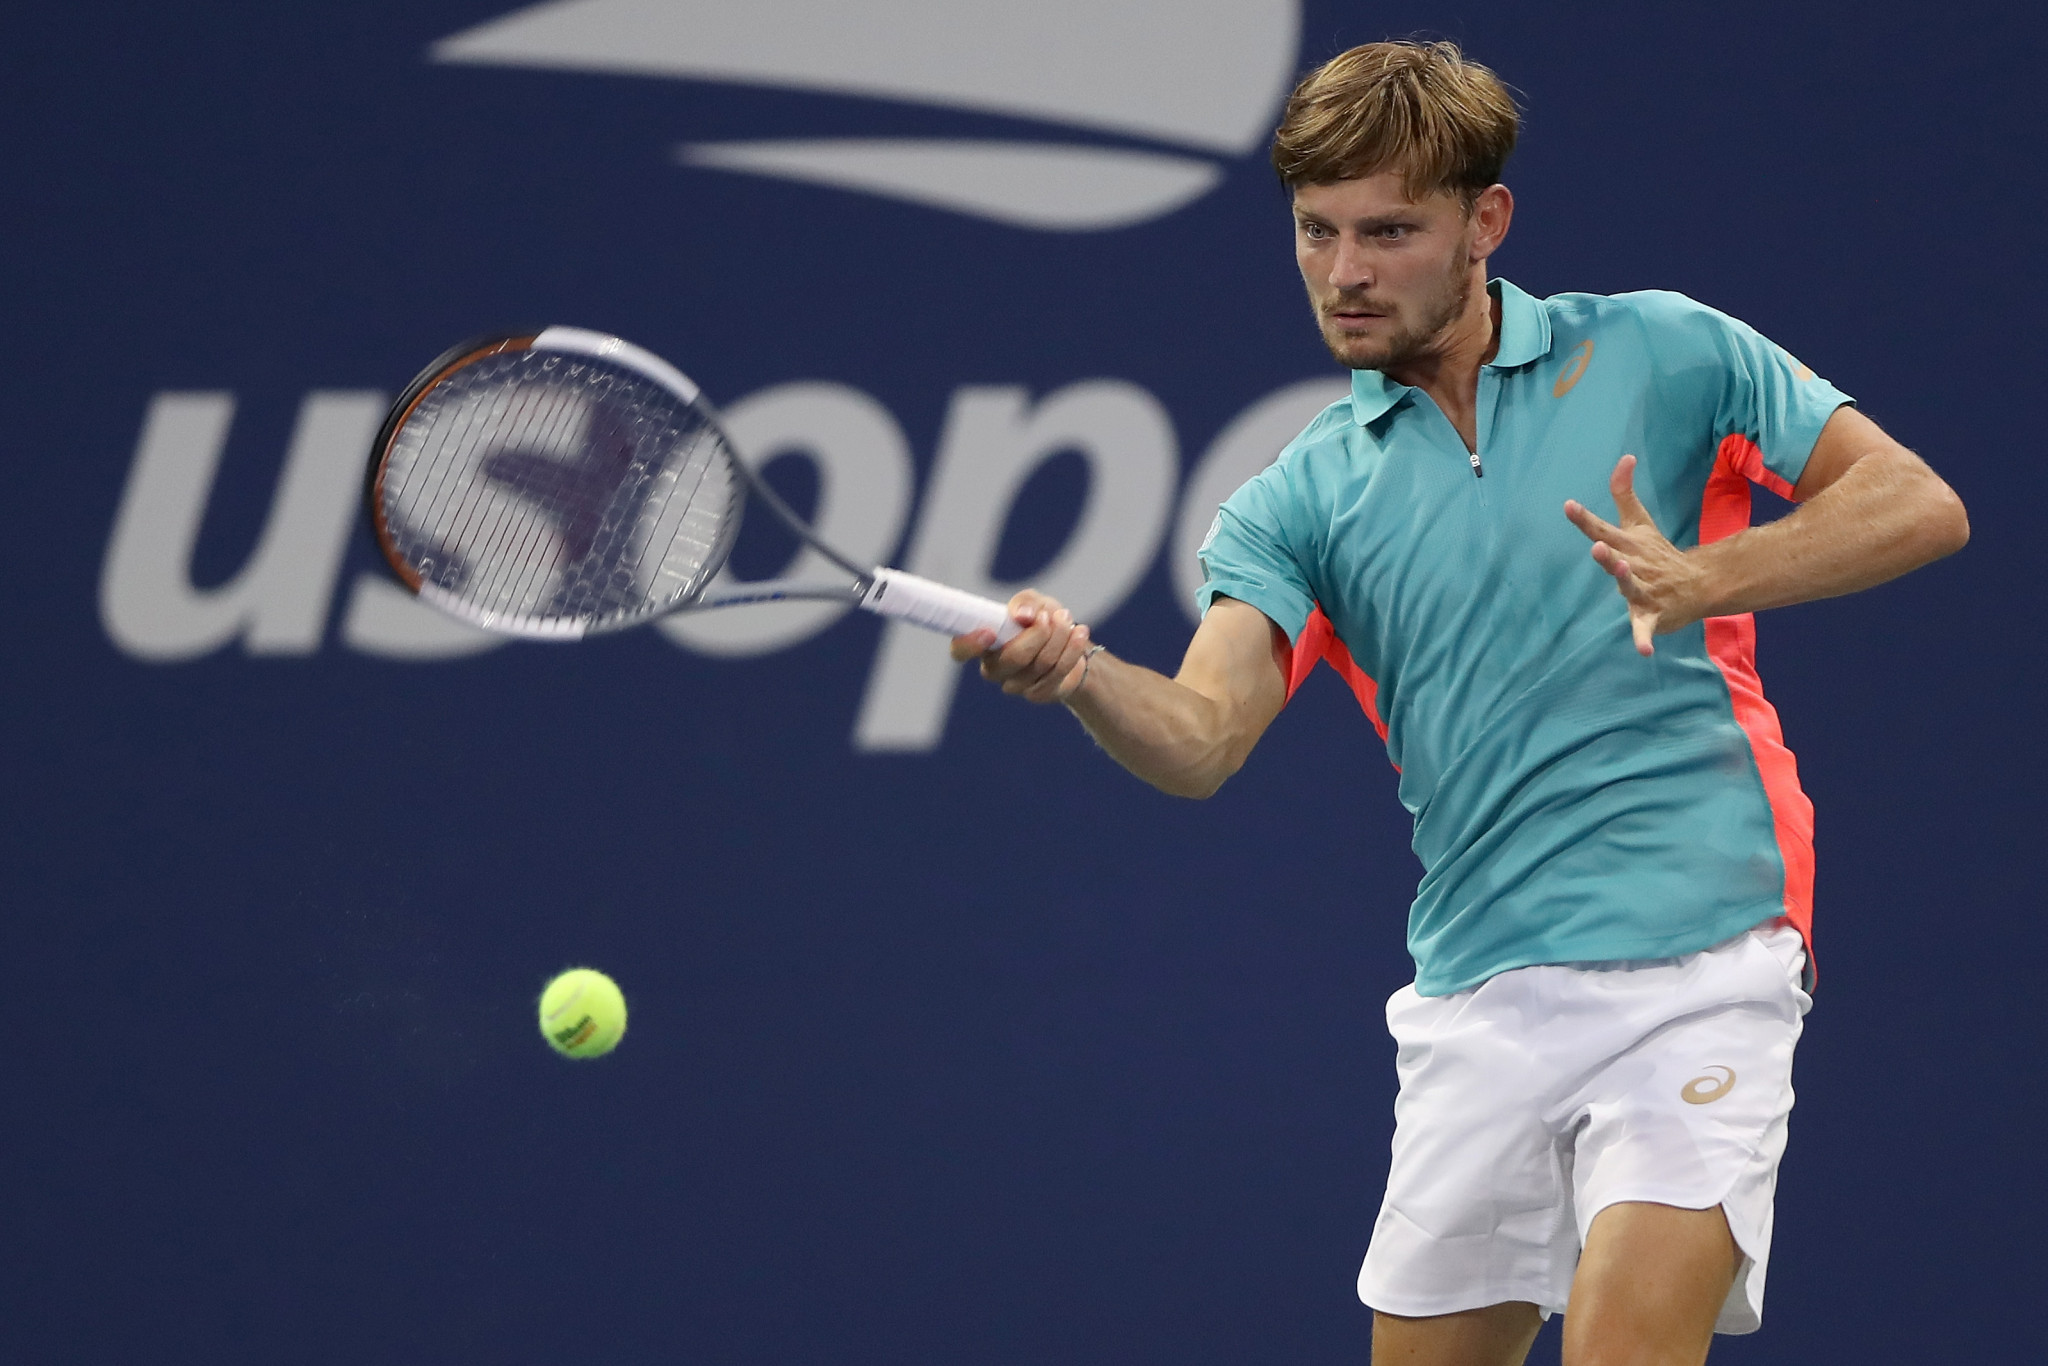 Men's seventh seed David Goffin reached round two with a four set win over American Reilly Opelka ©Getty Images